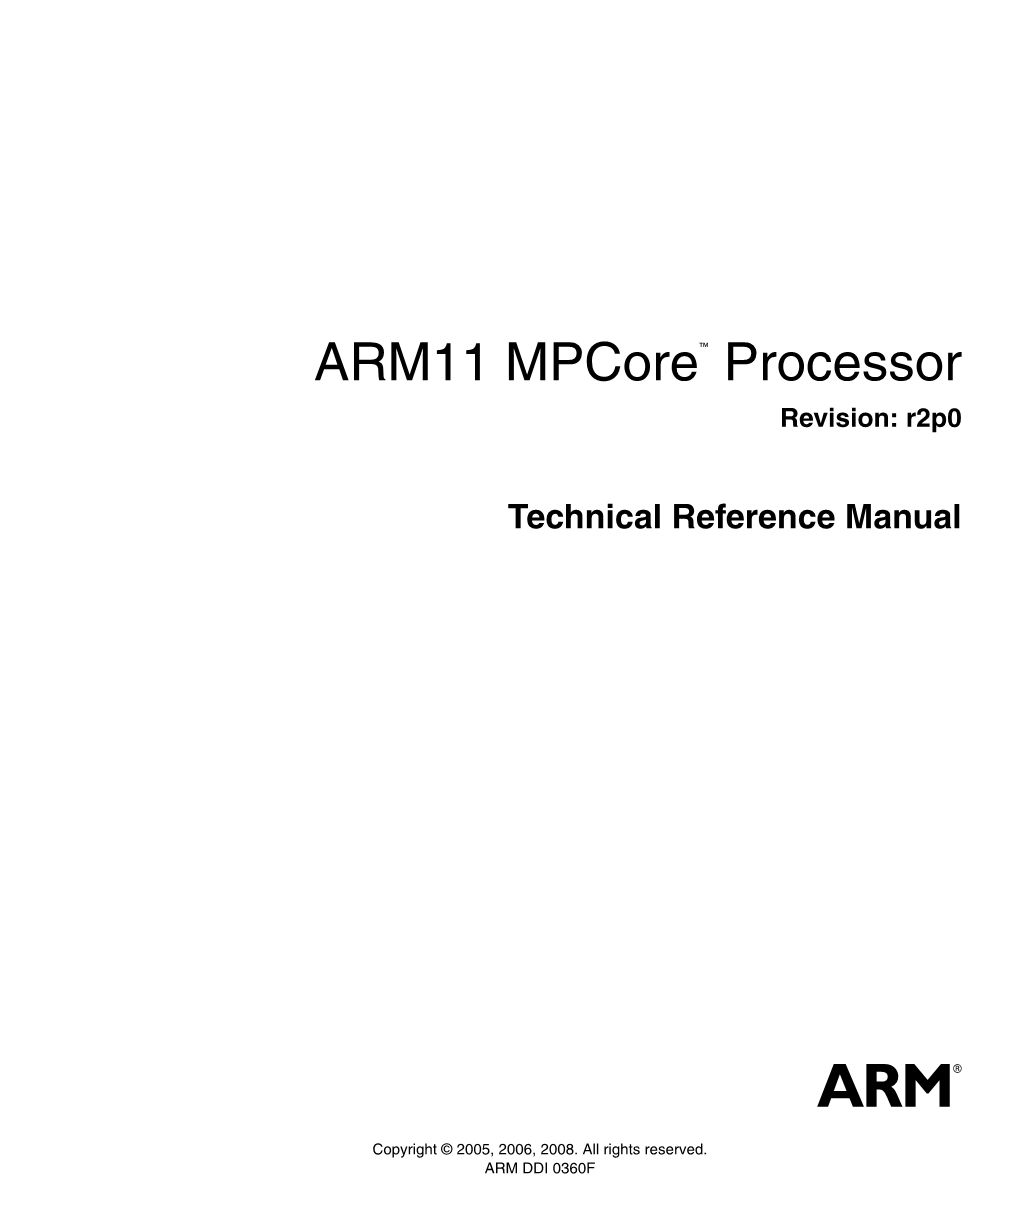 ARM11 Mpcore Processor Technical Reference Manual